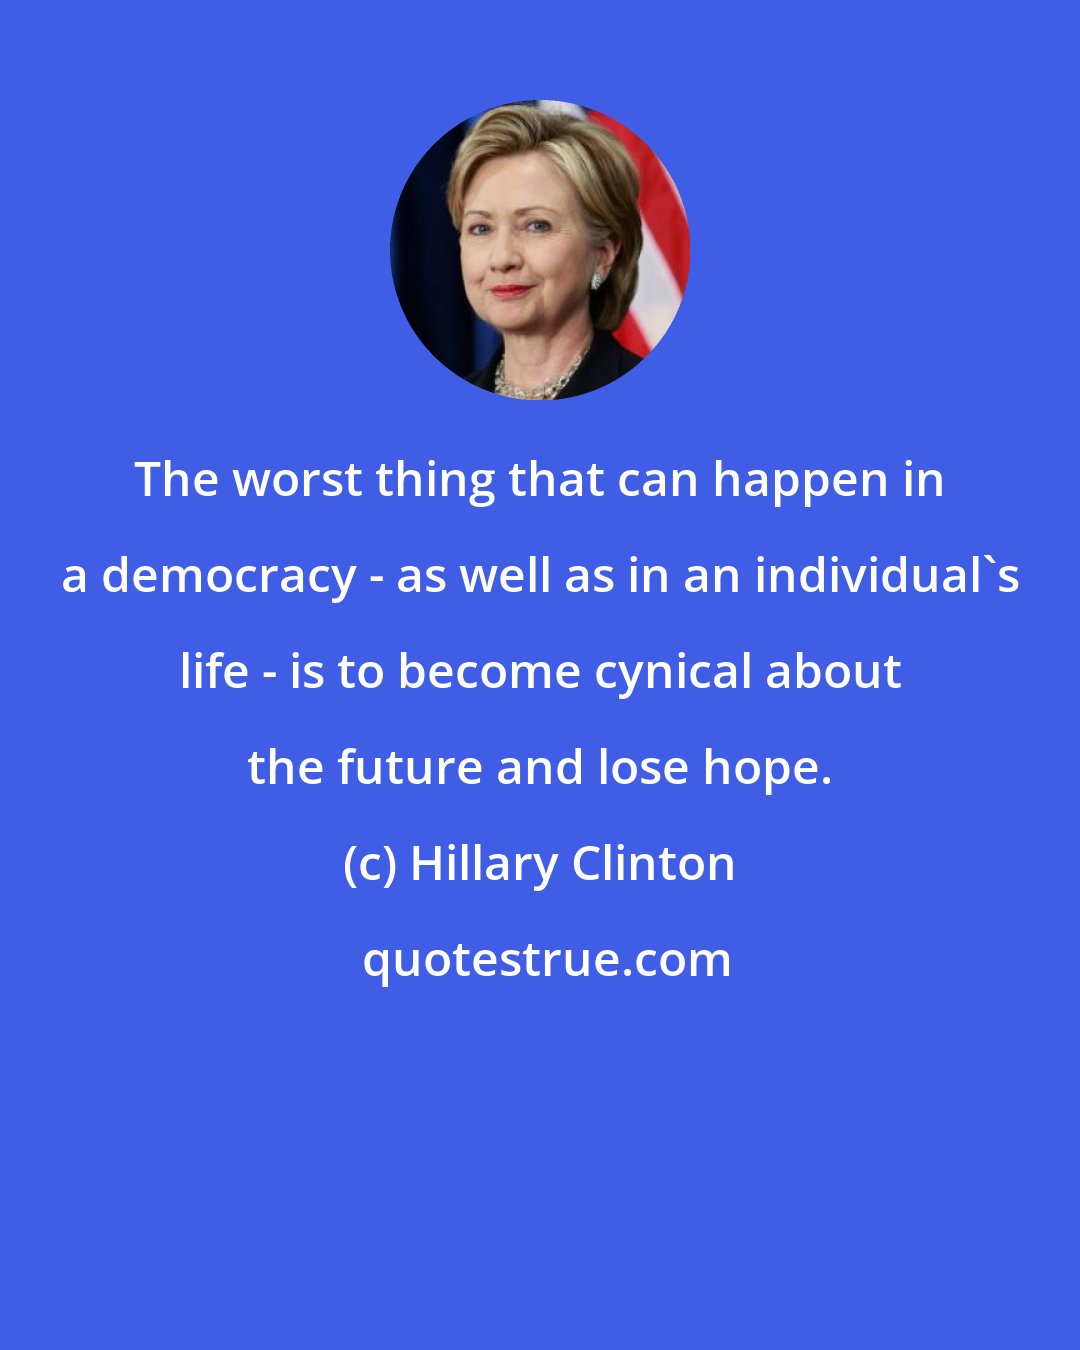 Hillary Clinton: The worst thing that can happen in a democracy - as well as in an individual's life - is to become cynical about the future and lose hope.